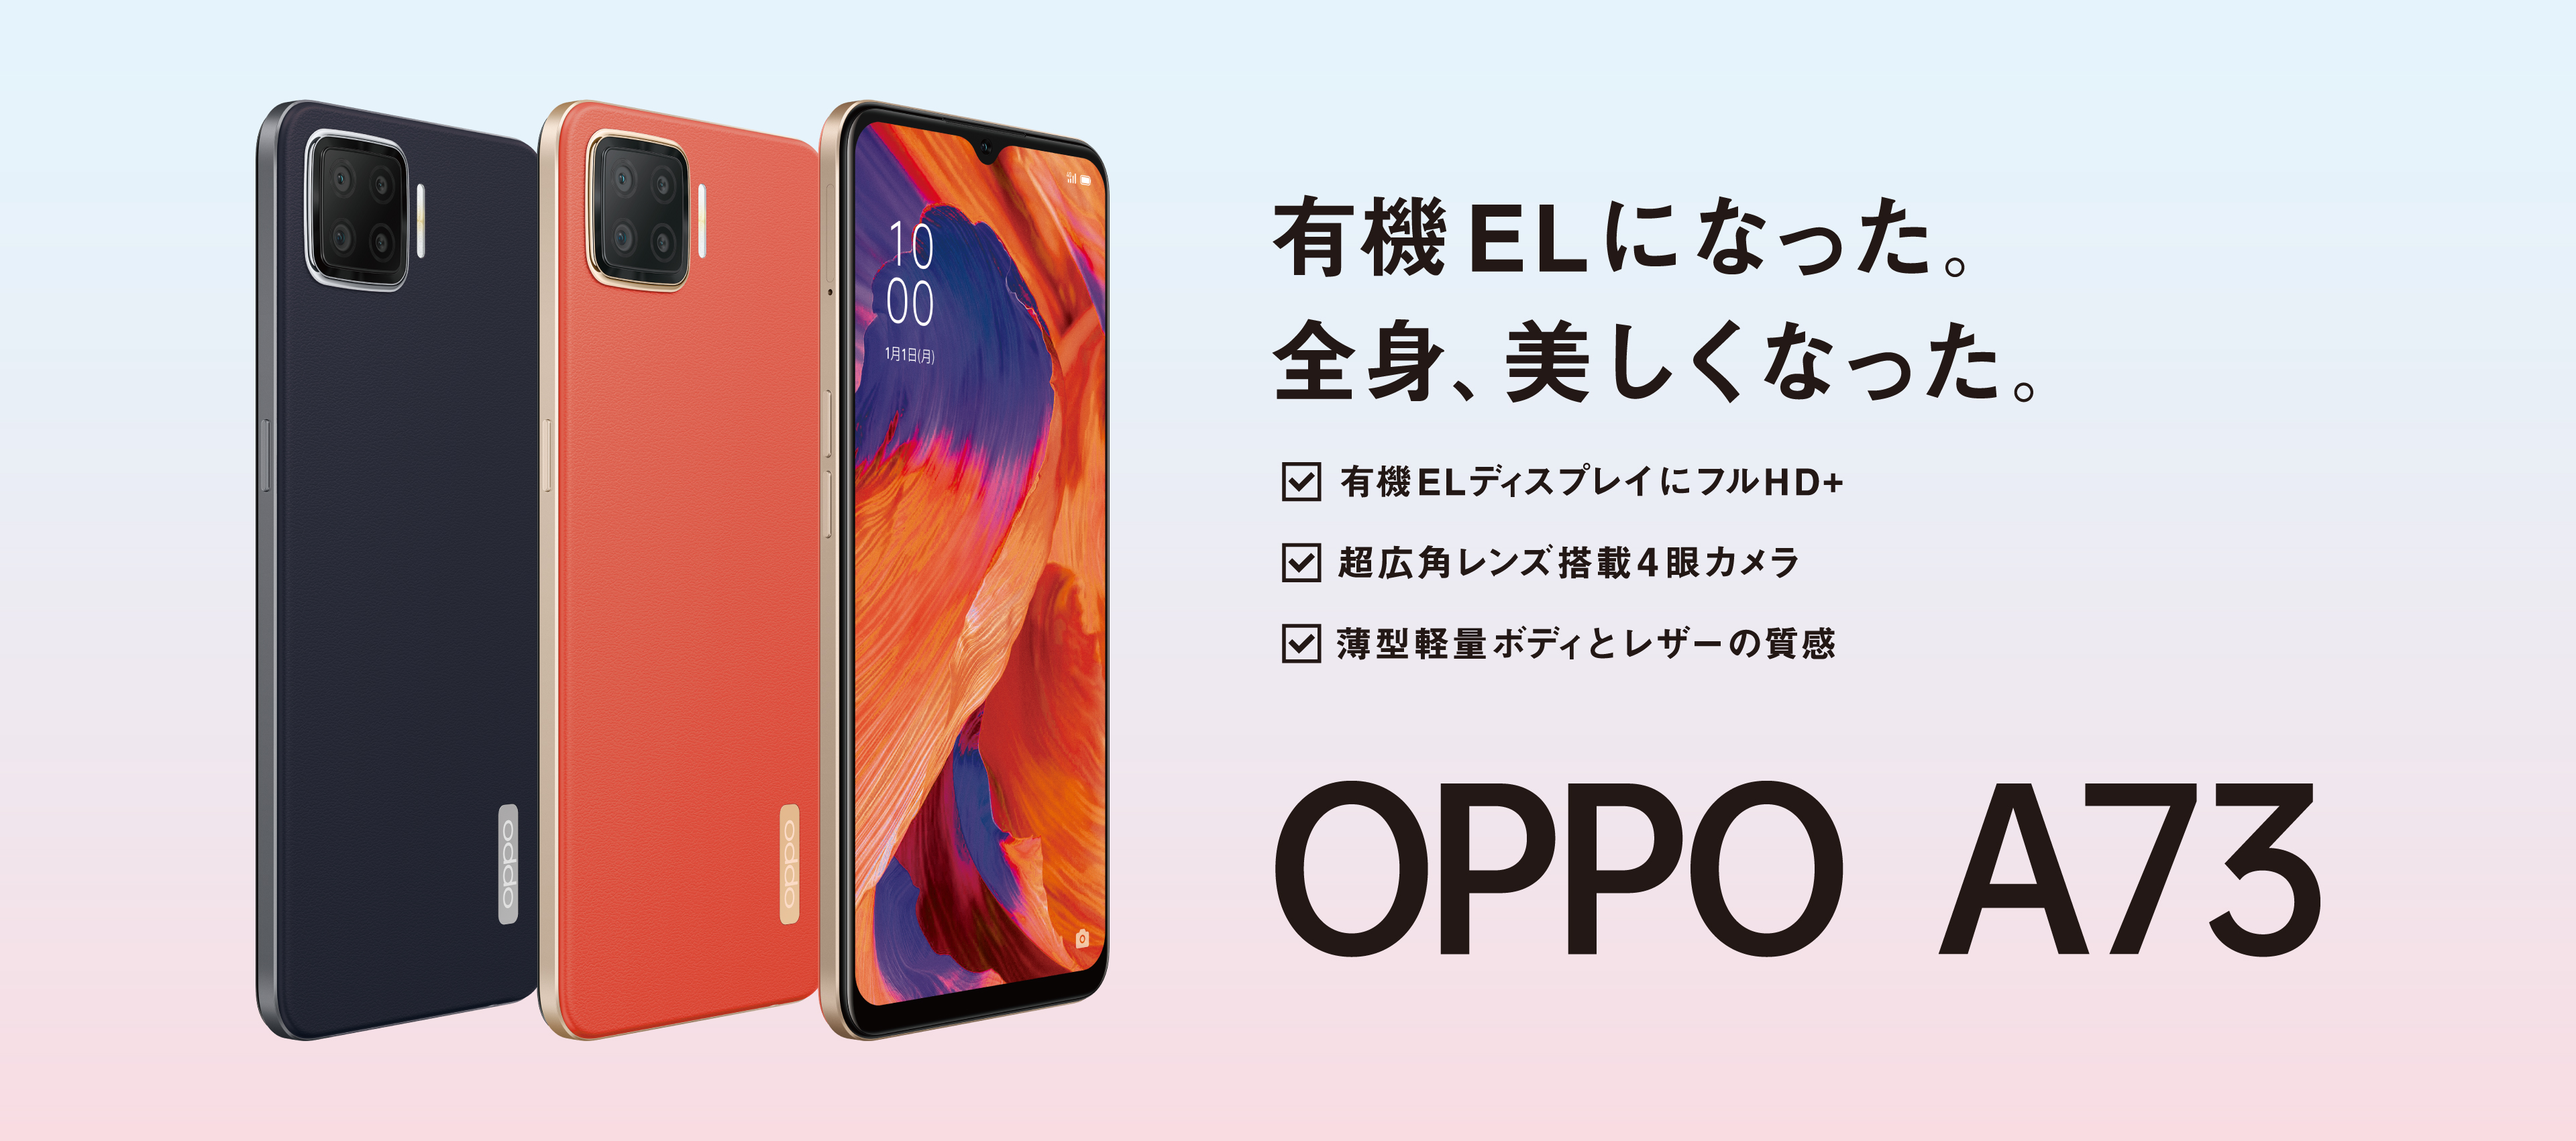 OPPO A73 Activate the Moment